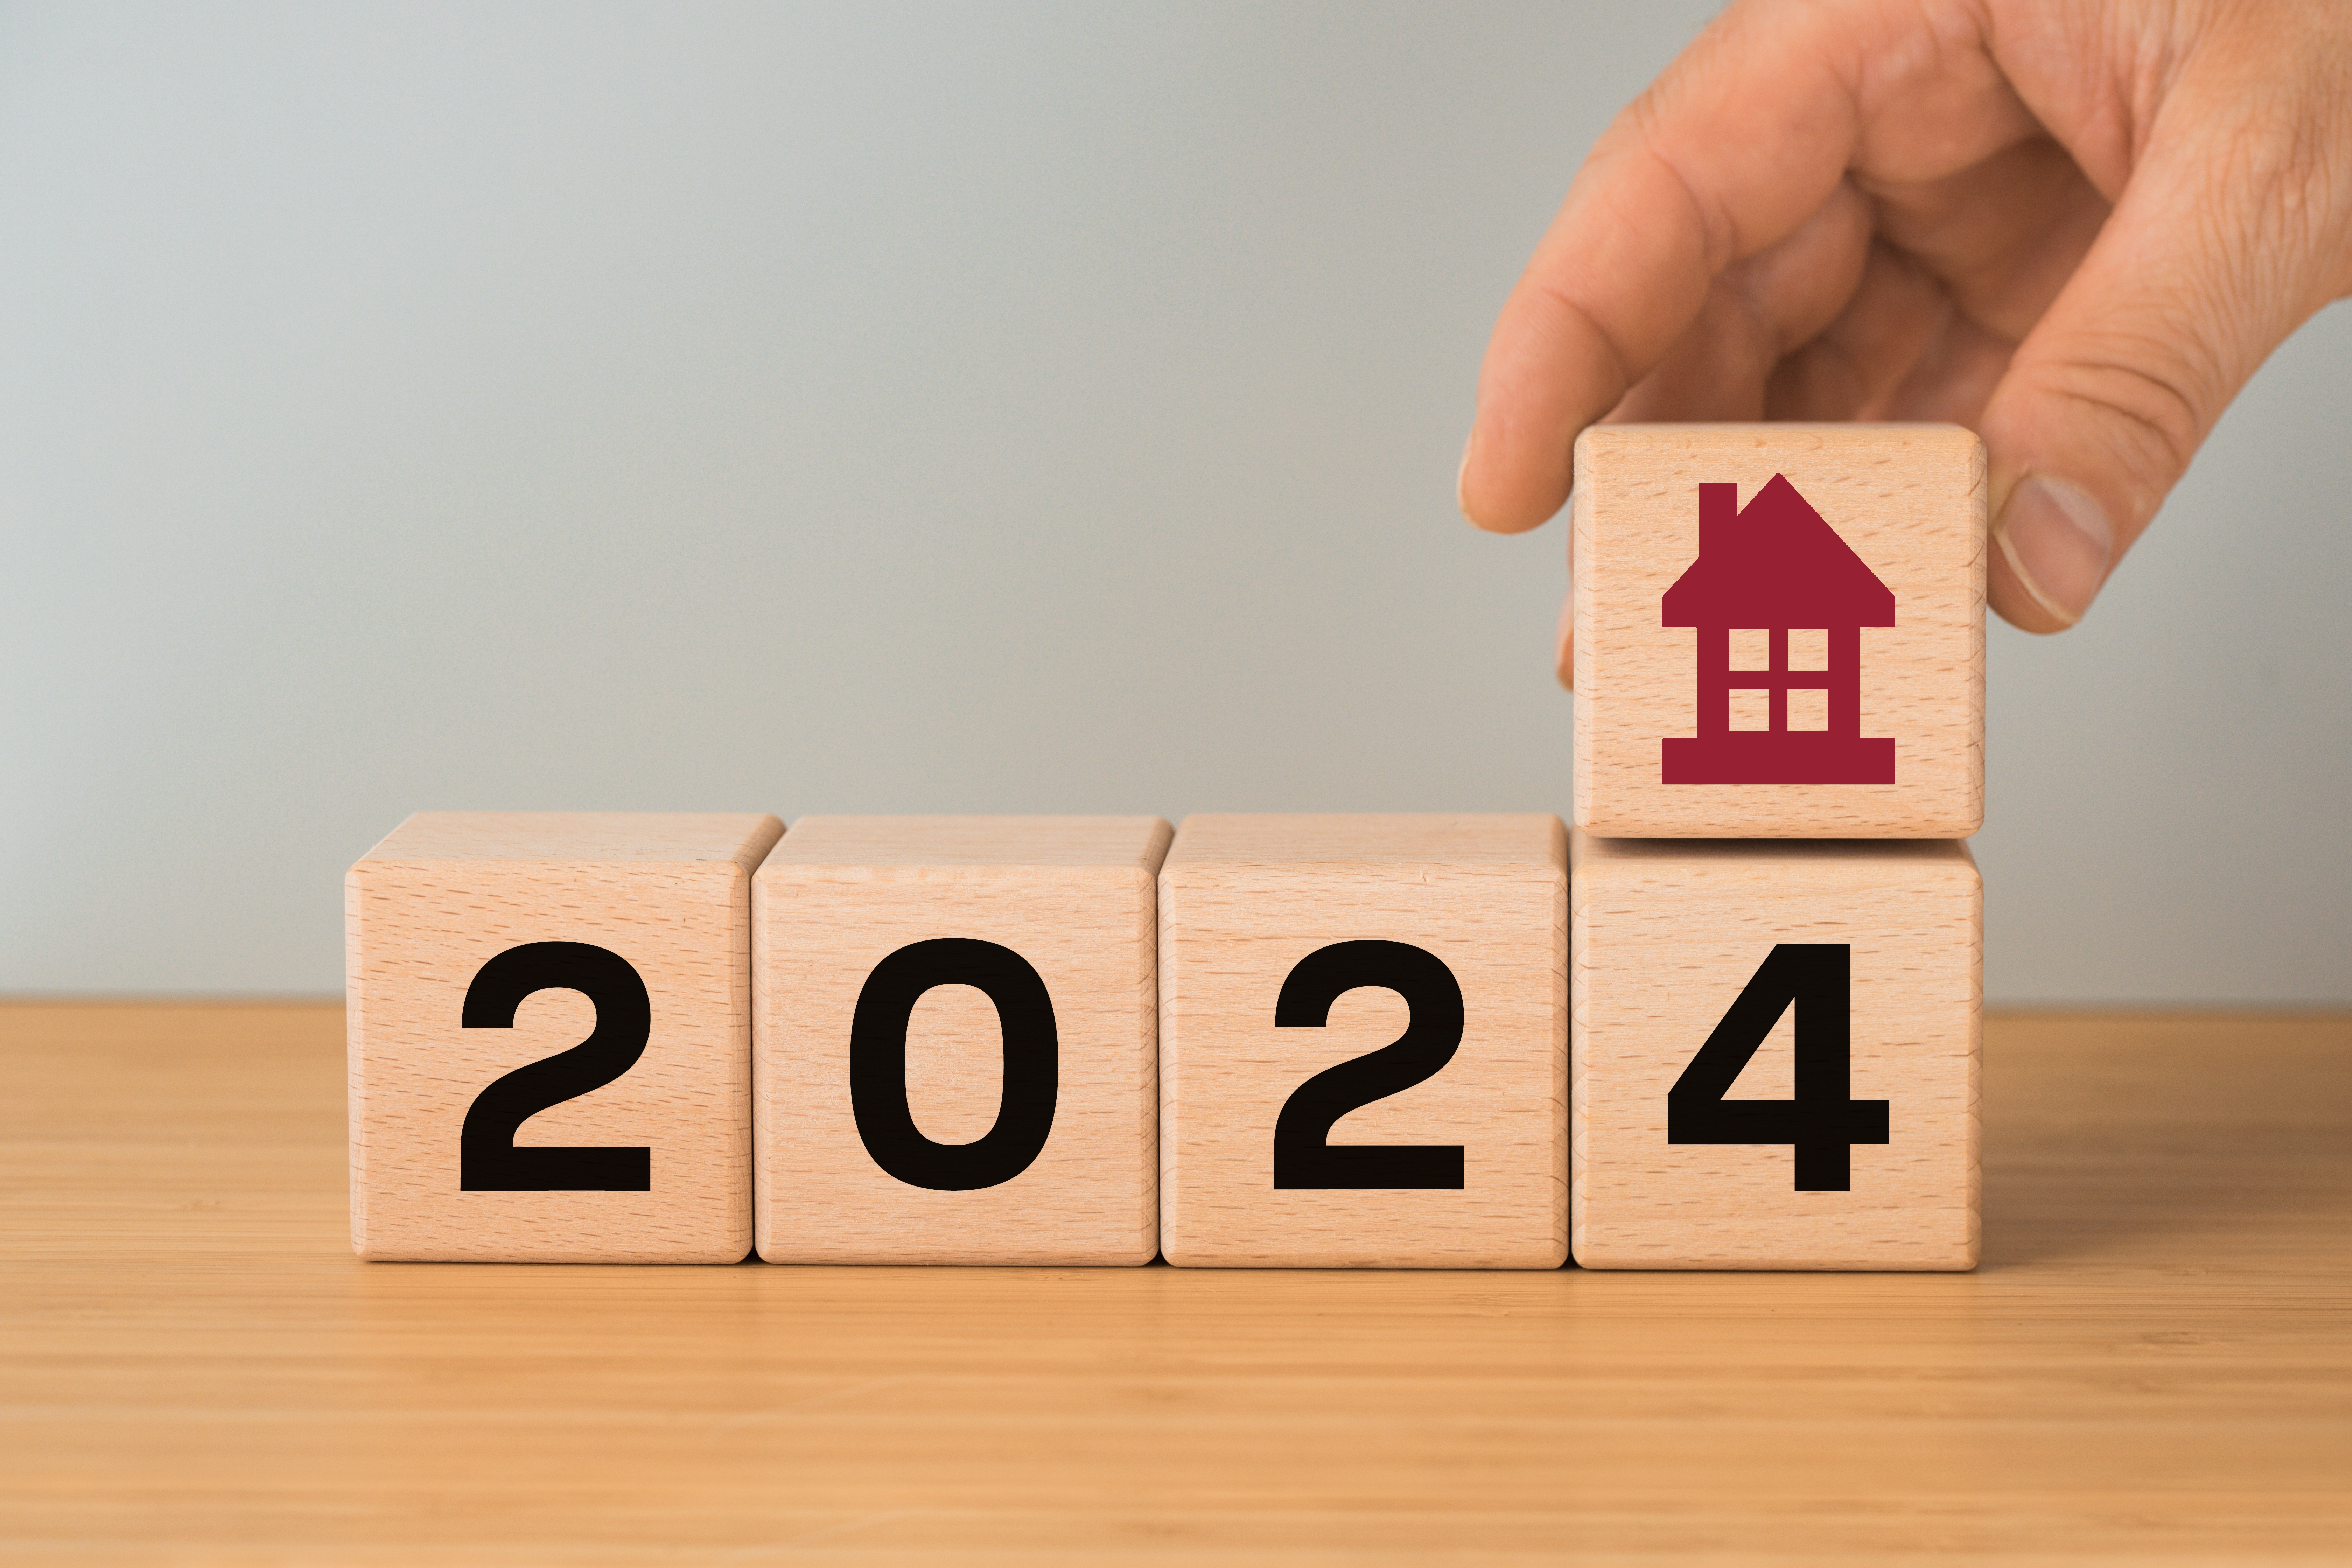 Expert Quotes on the 2024 Housing Market Forecast